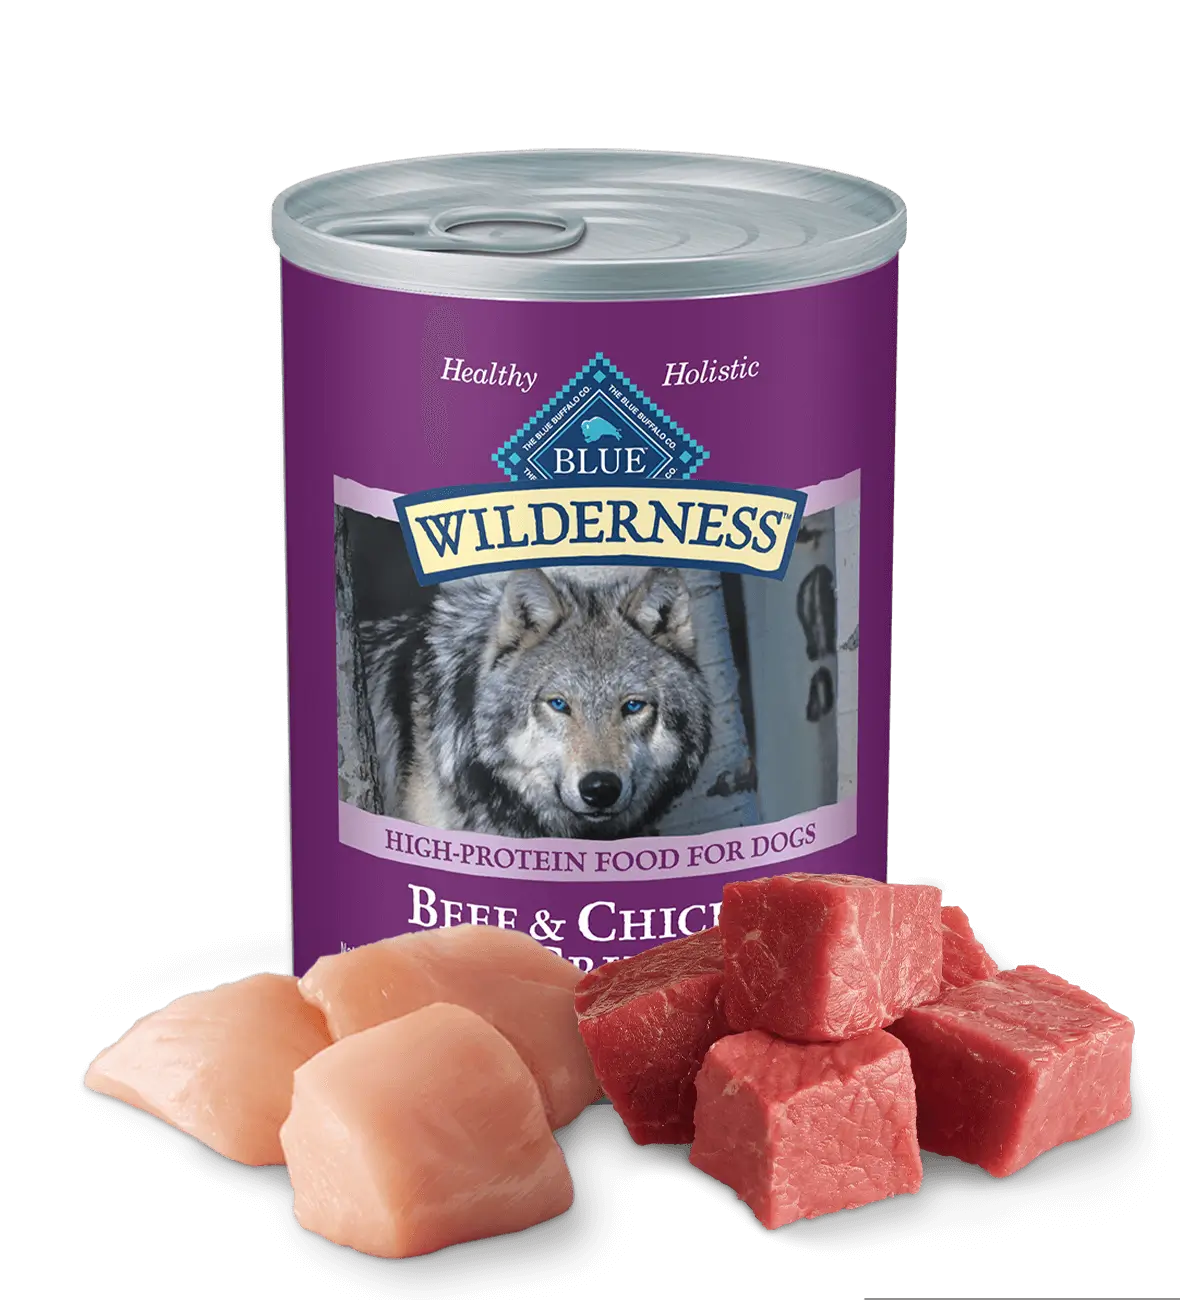 Blue Buffalo Wilderness Dog Food Review (Canned)